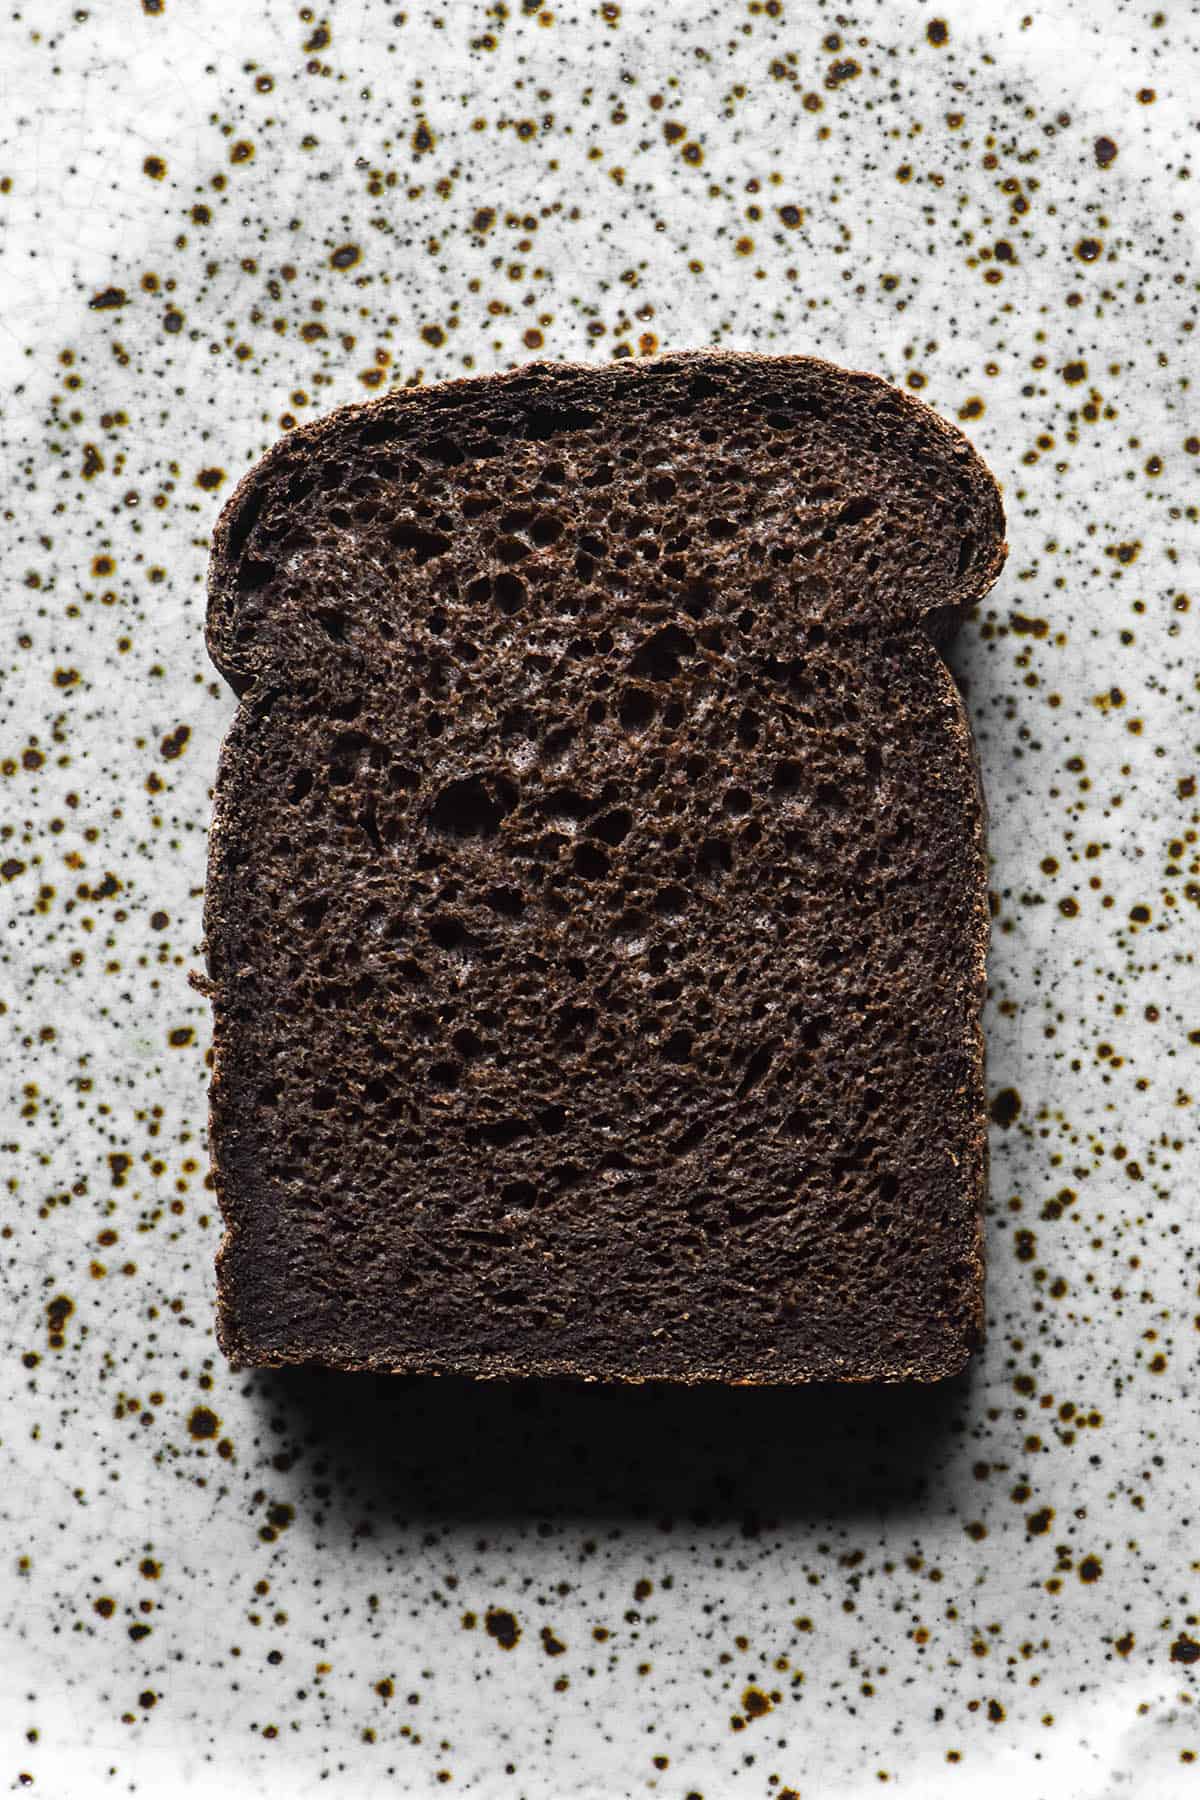 An aerial image of a slice of gluten free buckwheat bread made with dark buckwheat flour. The slice sits atop a white speckled ceramic plate